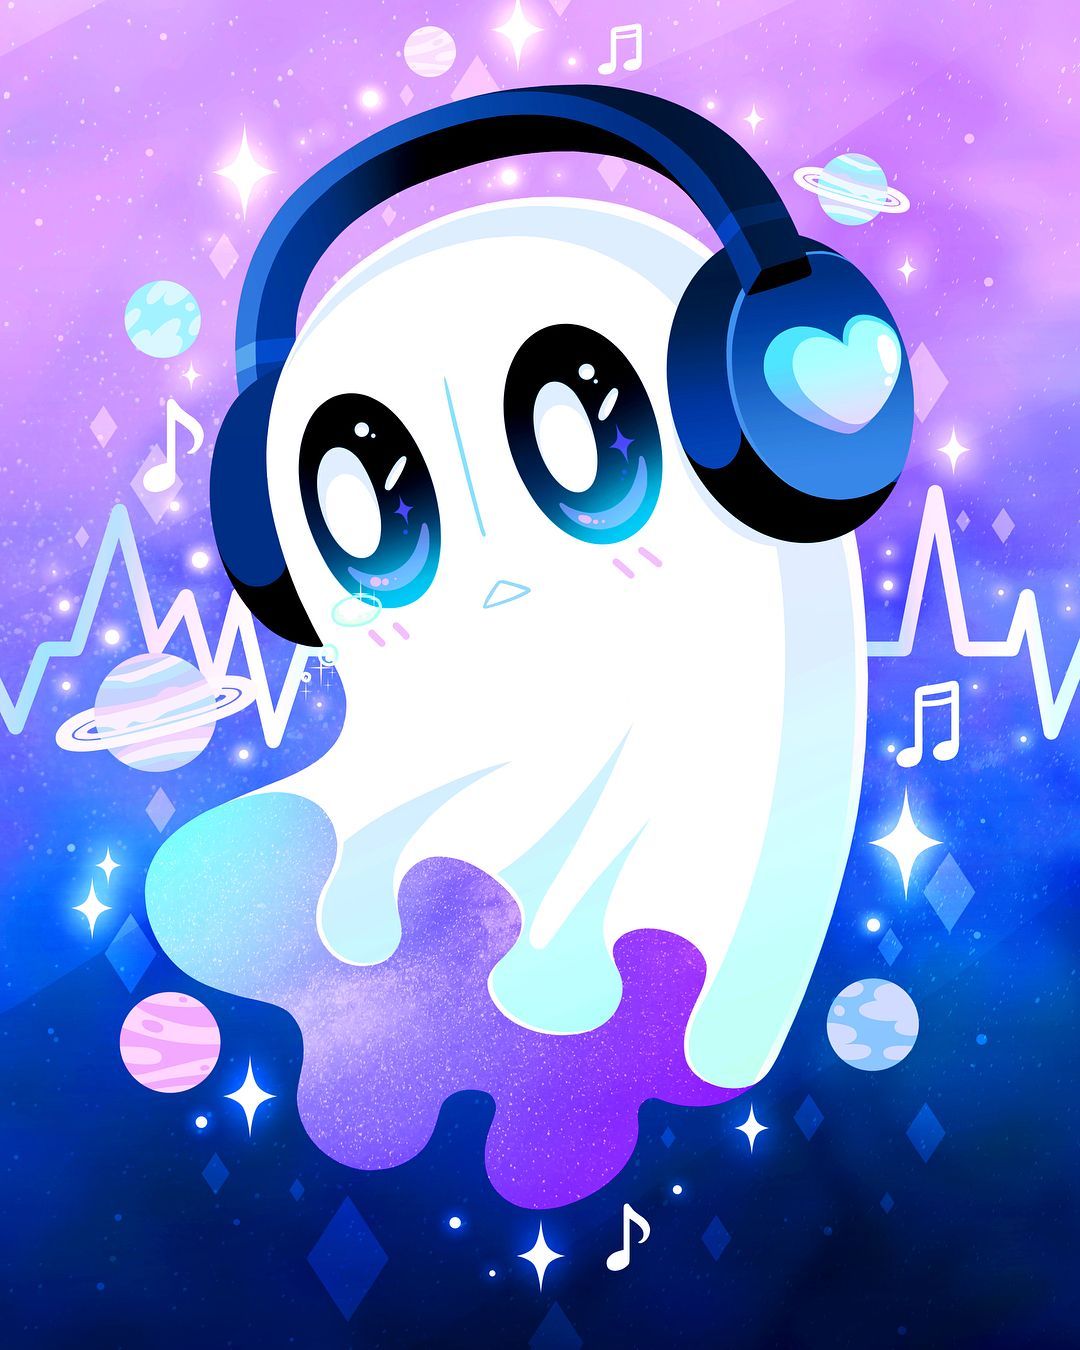 I made a wallpaper for Napstablook, hope you guys like it! : r